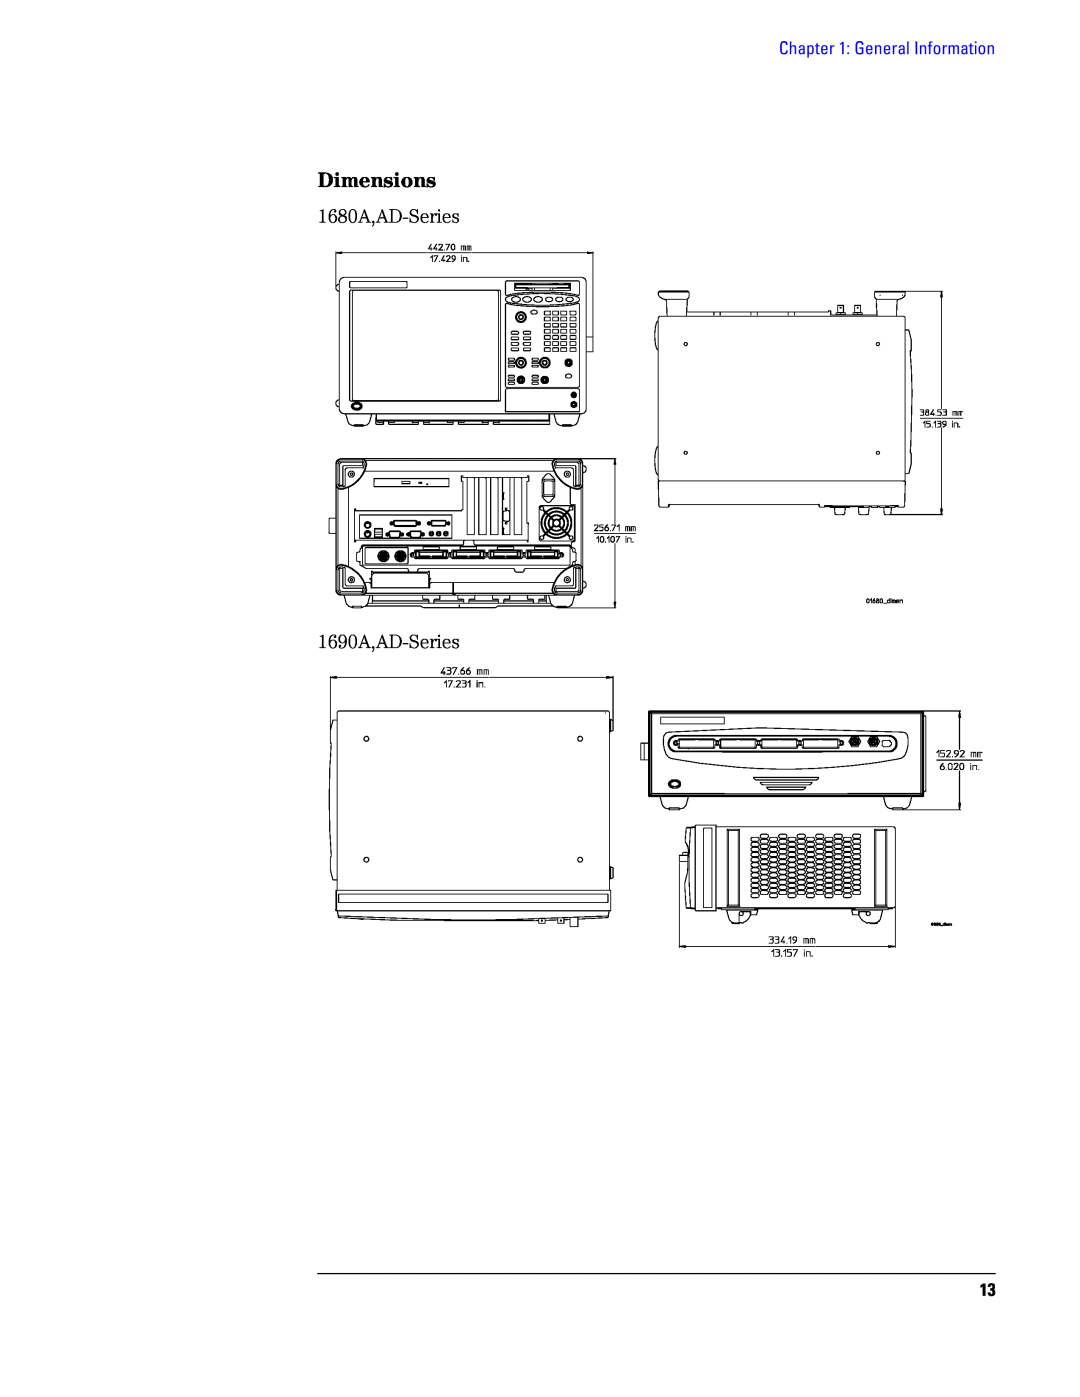 Agilent Technologies manual Dimensions, 1680A,AD-Series 1690A,AD-Series, General Information 